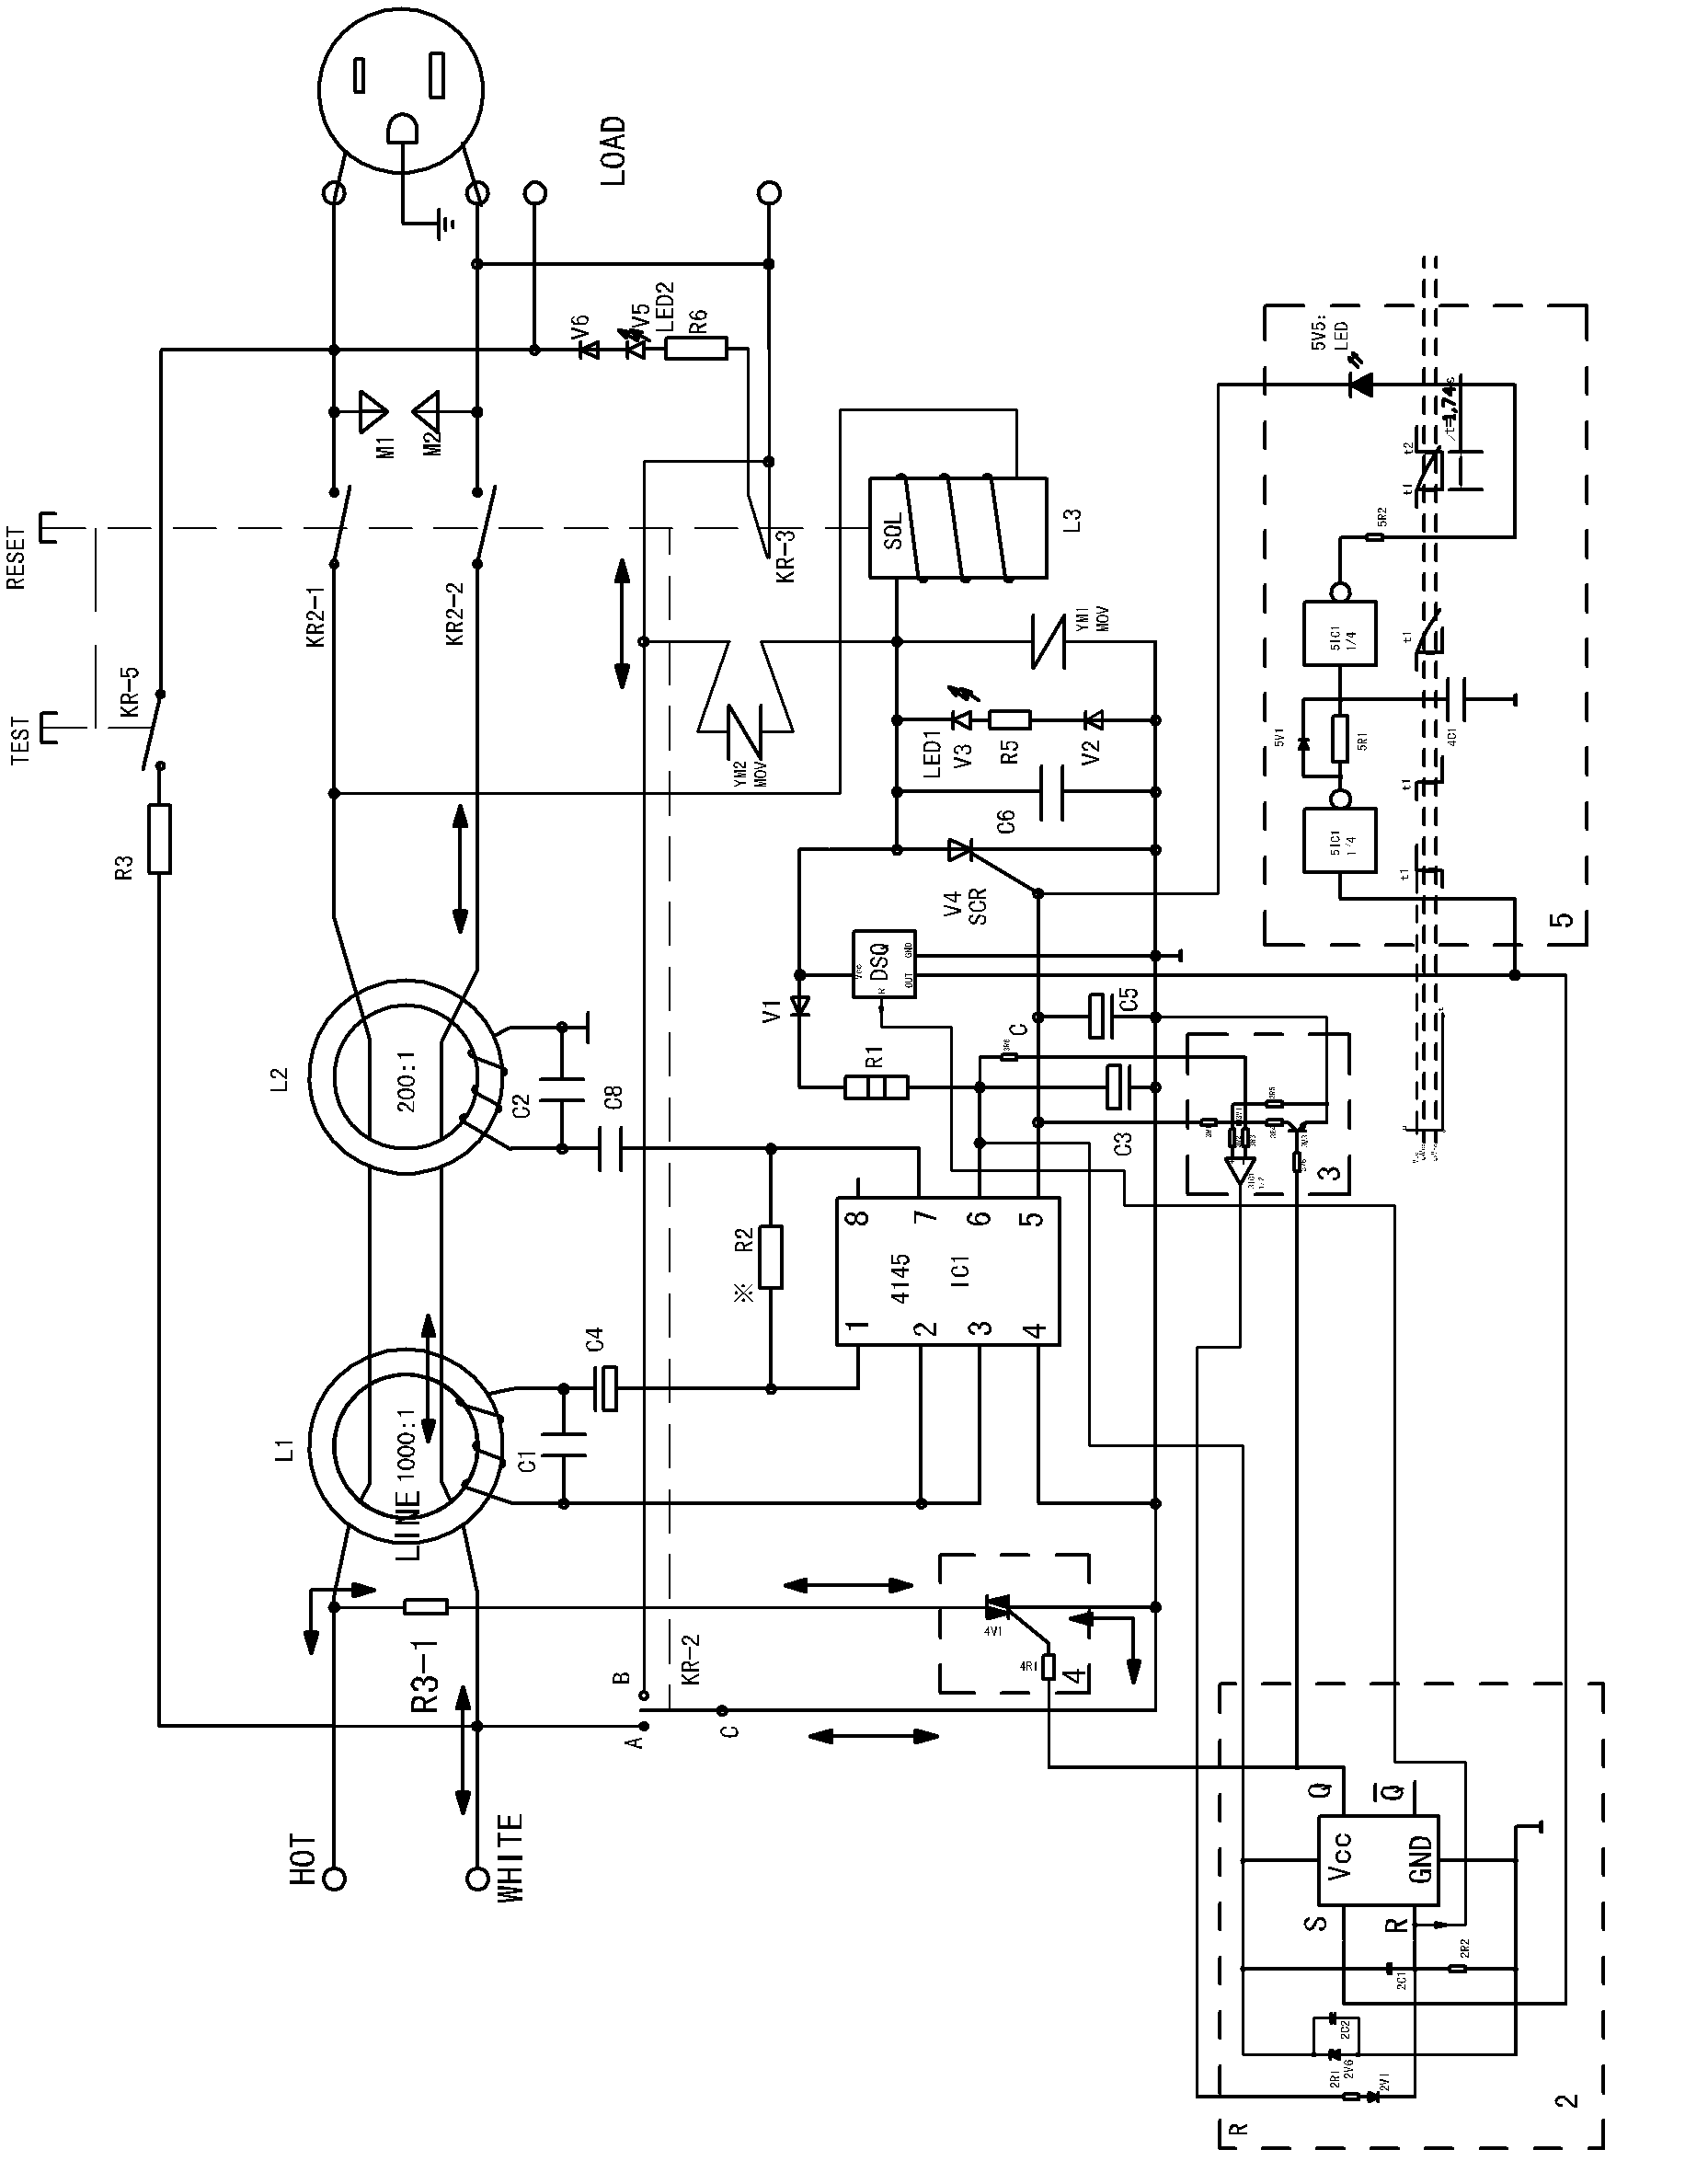 Leakage detecting protection circuit capable of periodically automatically detecting function integrity